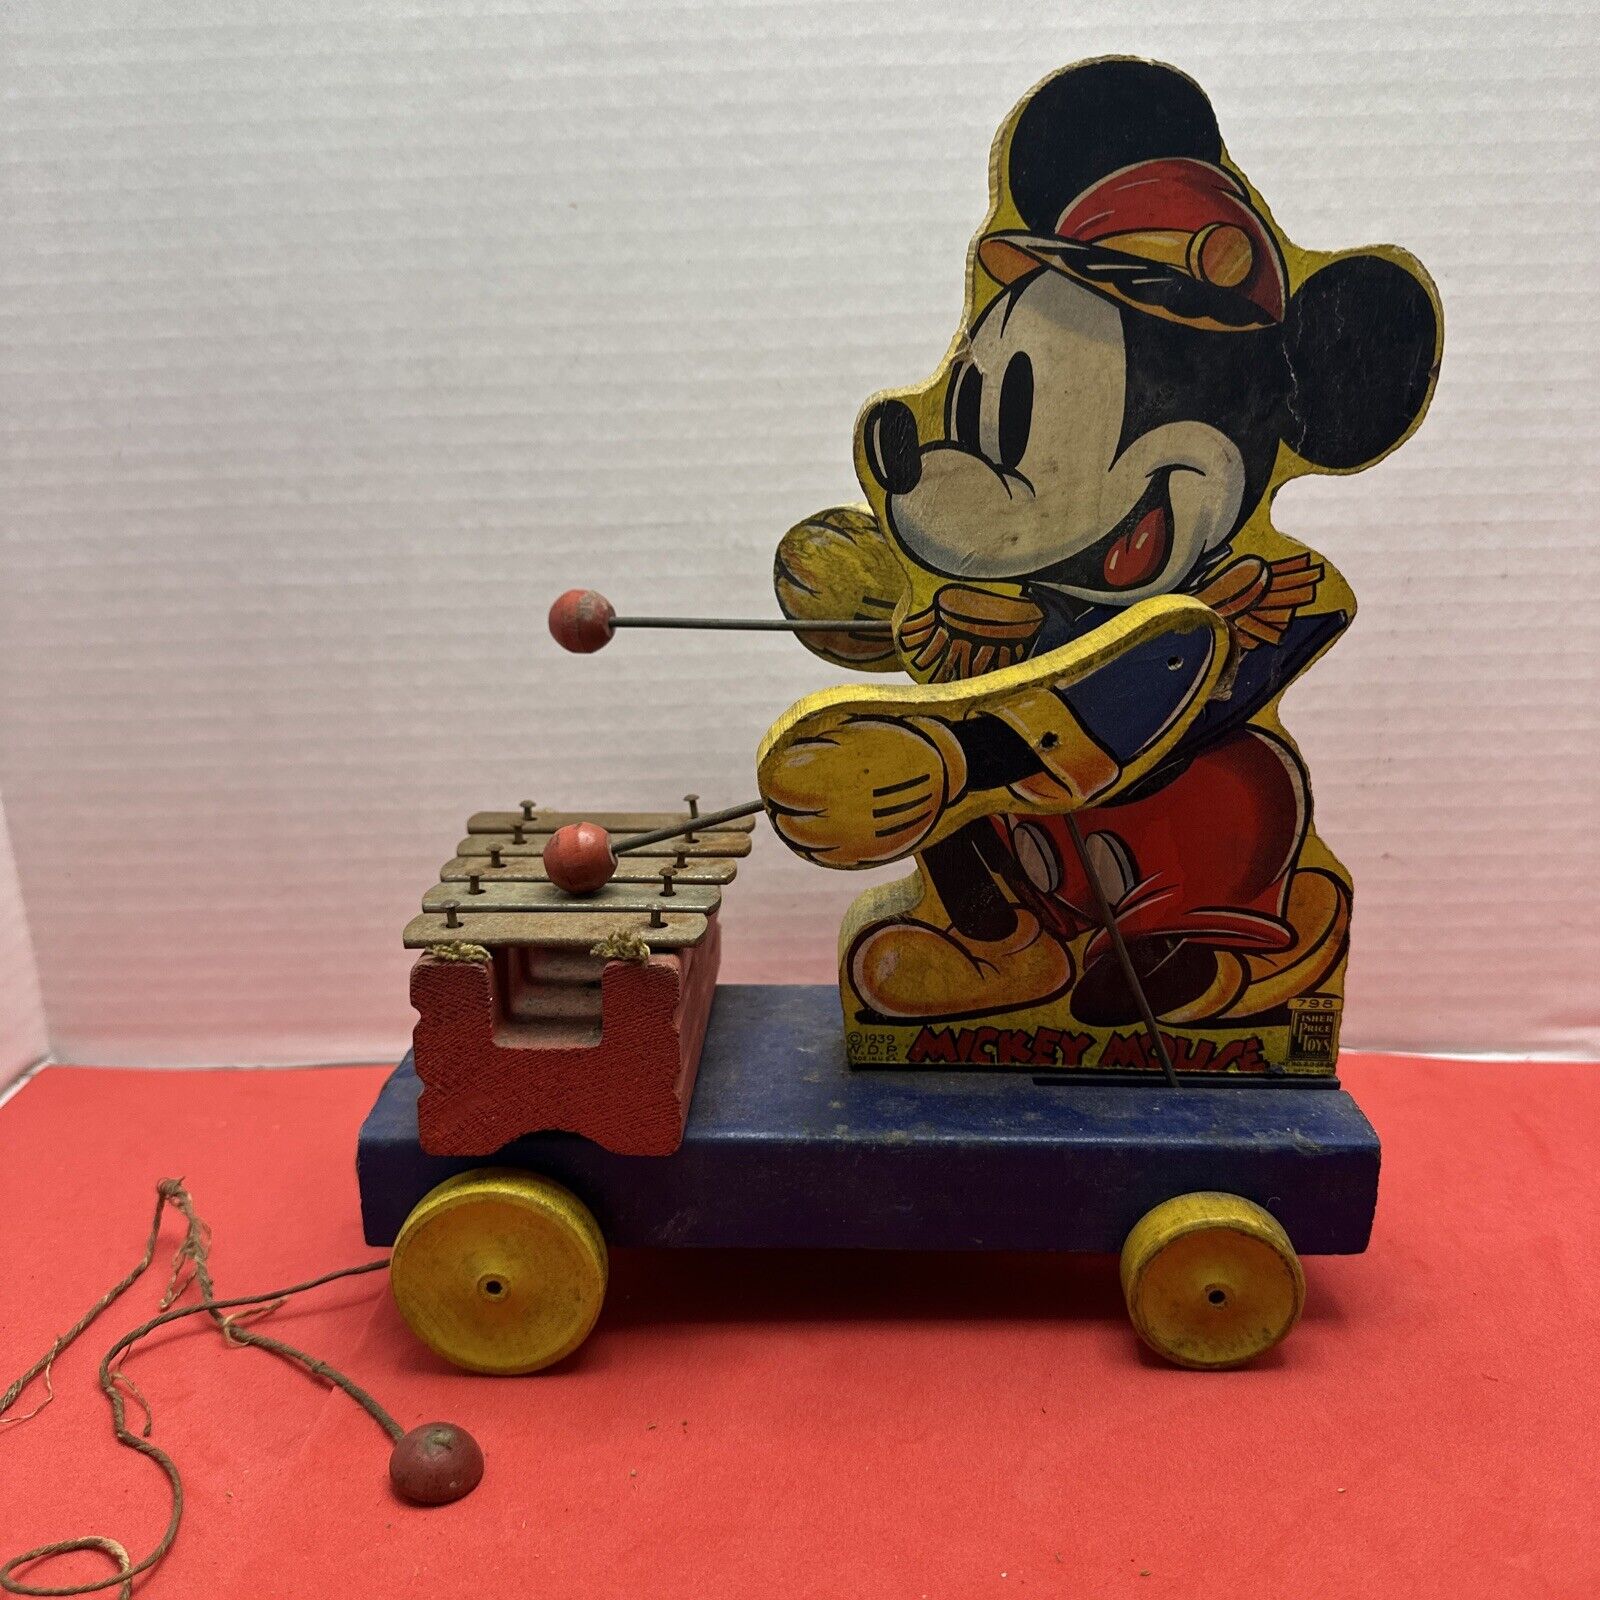 Vintage 1939 Fisher Price Mickey Mouse Xylophone Wood Pull Toy #798: Rarity 2